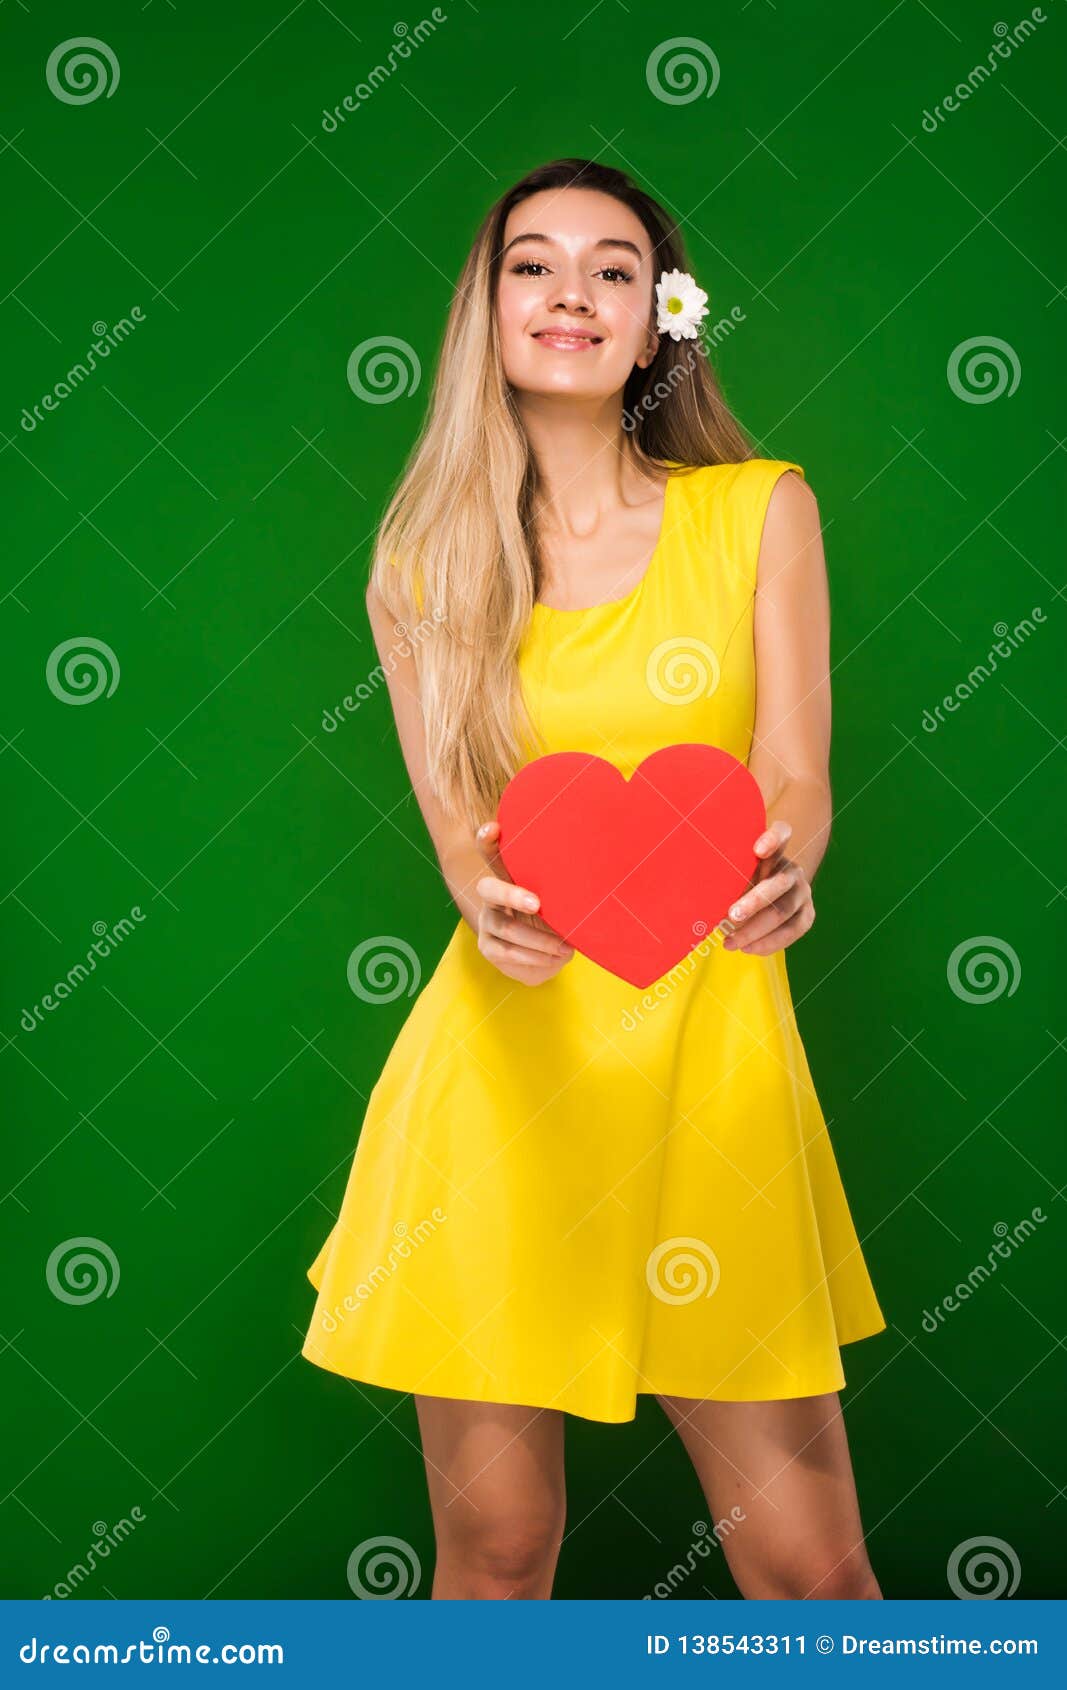 The Blonde In A Yellow Dress And With A Camomile In Her Hair Holds